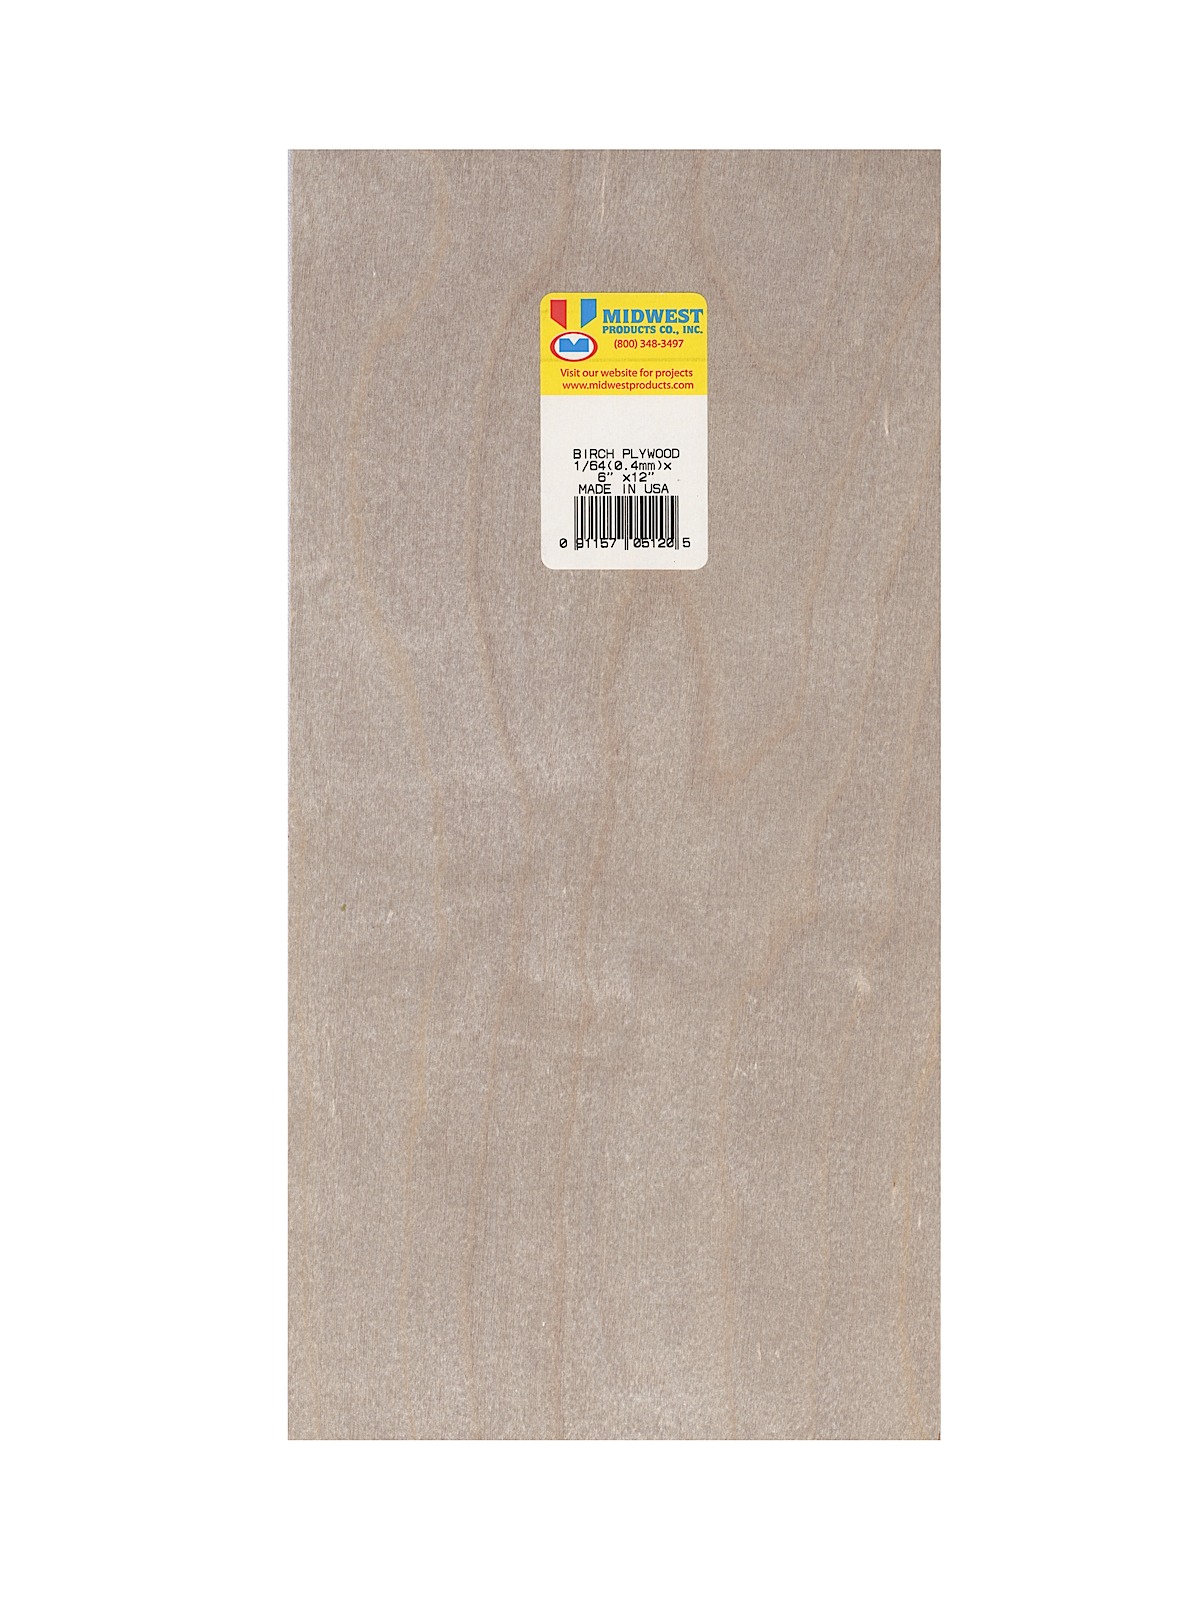 Thin Birch Plywood Aircraft Grade 1 64 In. 6 In. X 12 In.